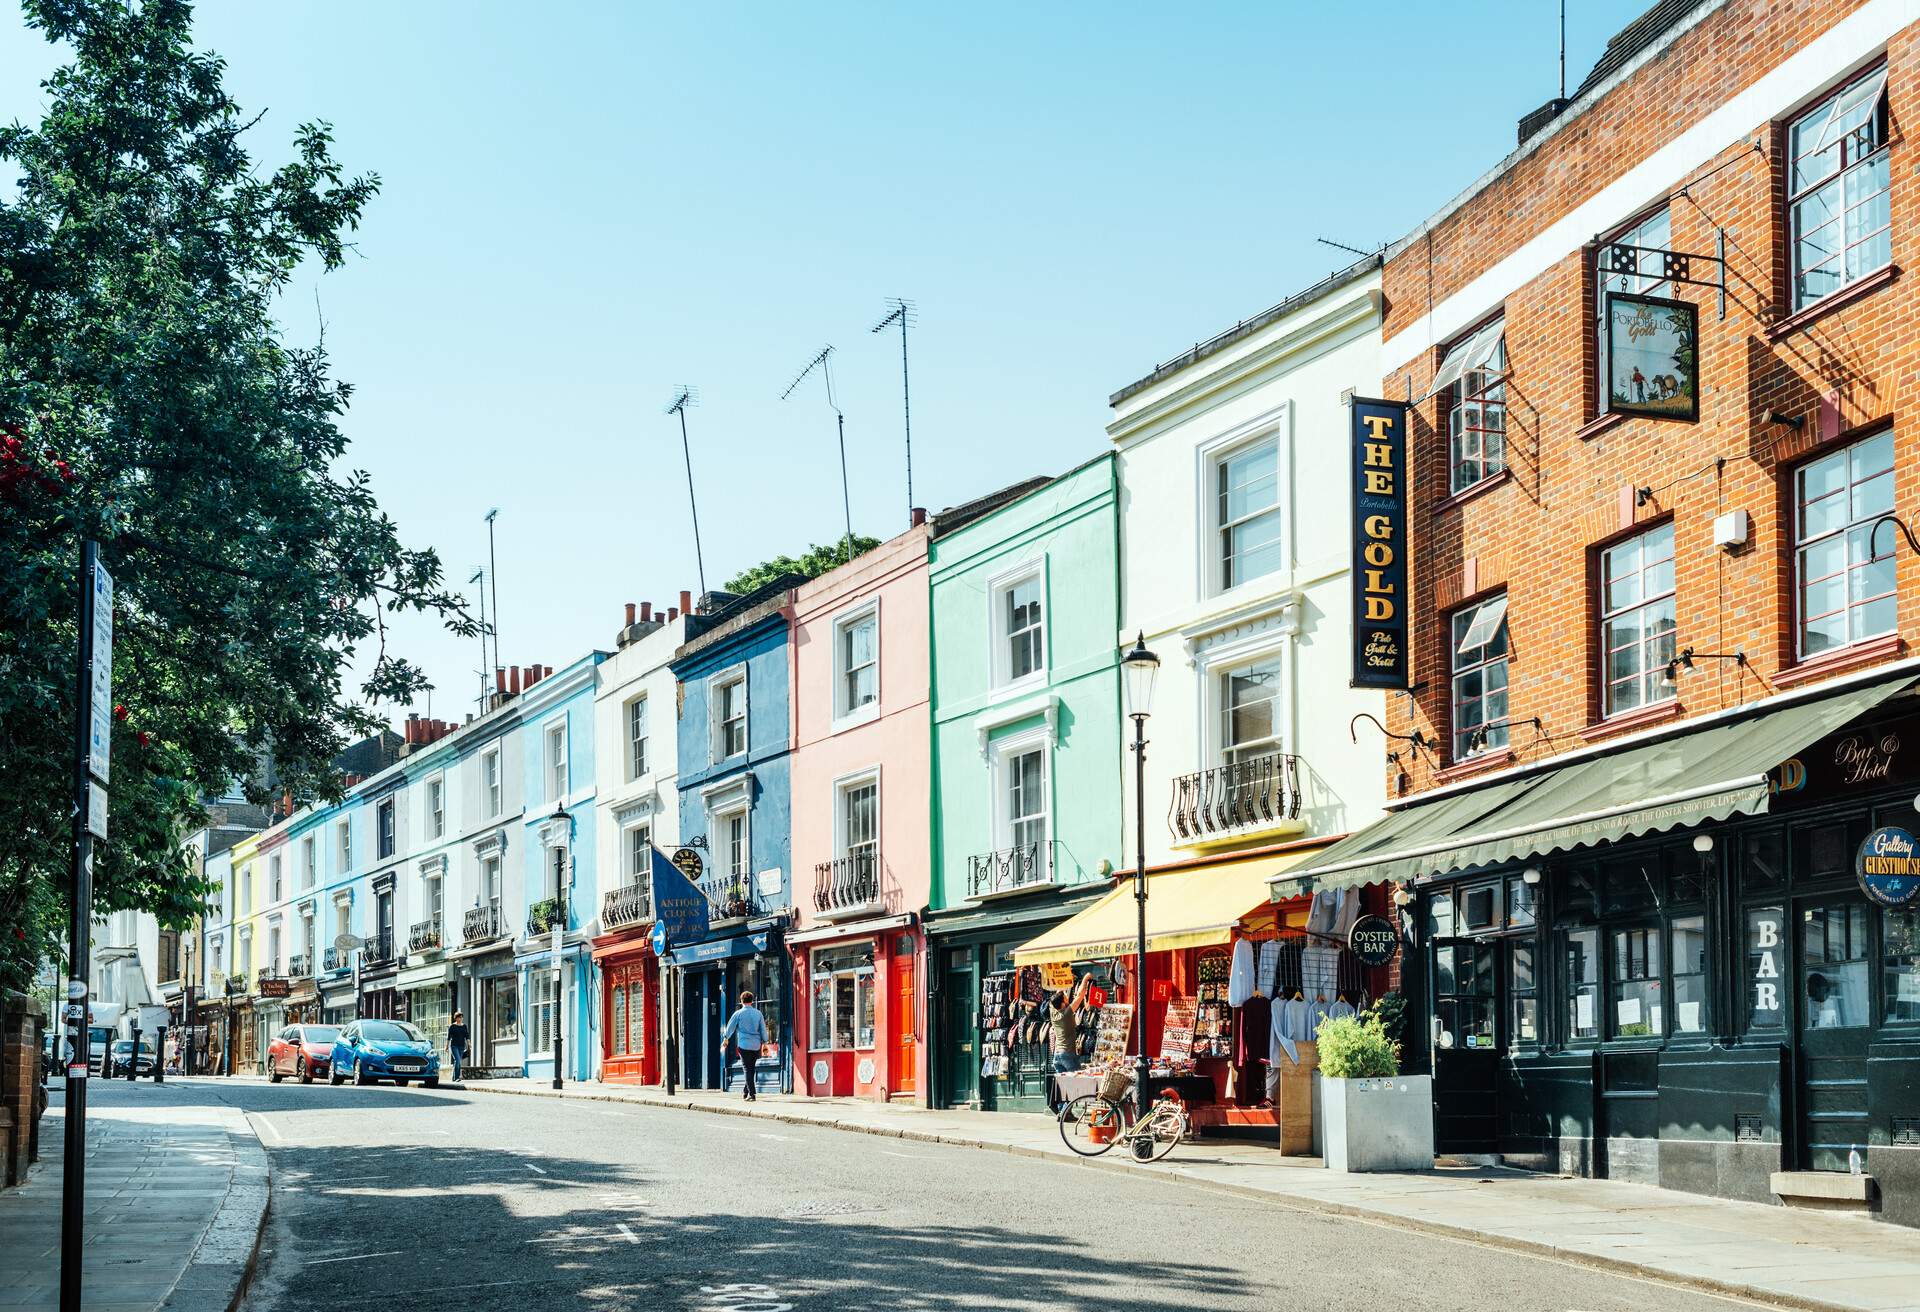 dest_uk_england_london_kensington-and-chelsea_notting-hill-portobello-road_gettyimages-694113254_universal_within-usage-period_31236